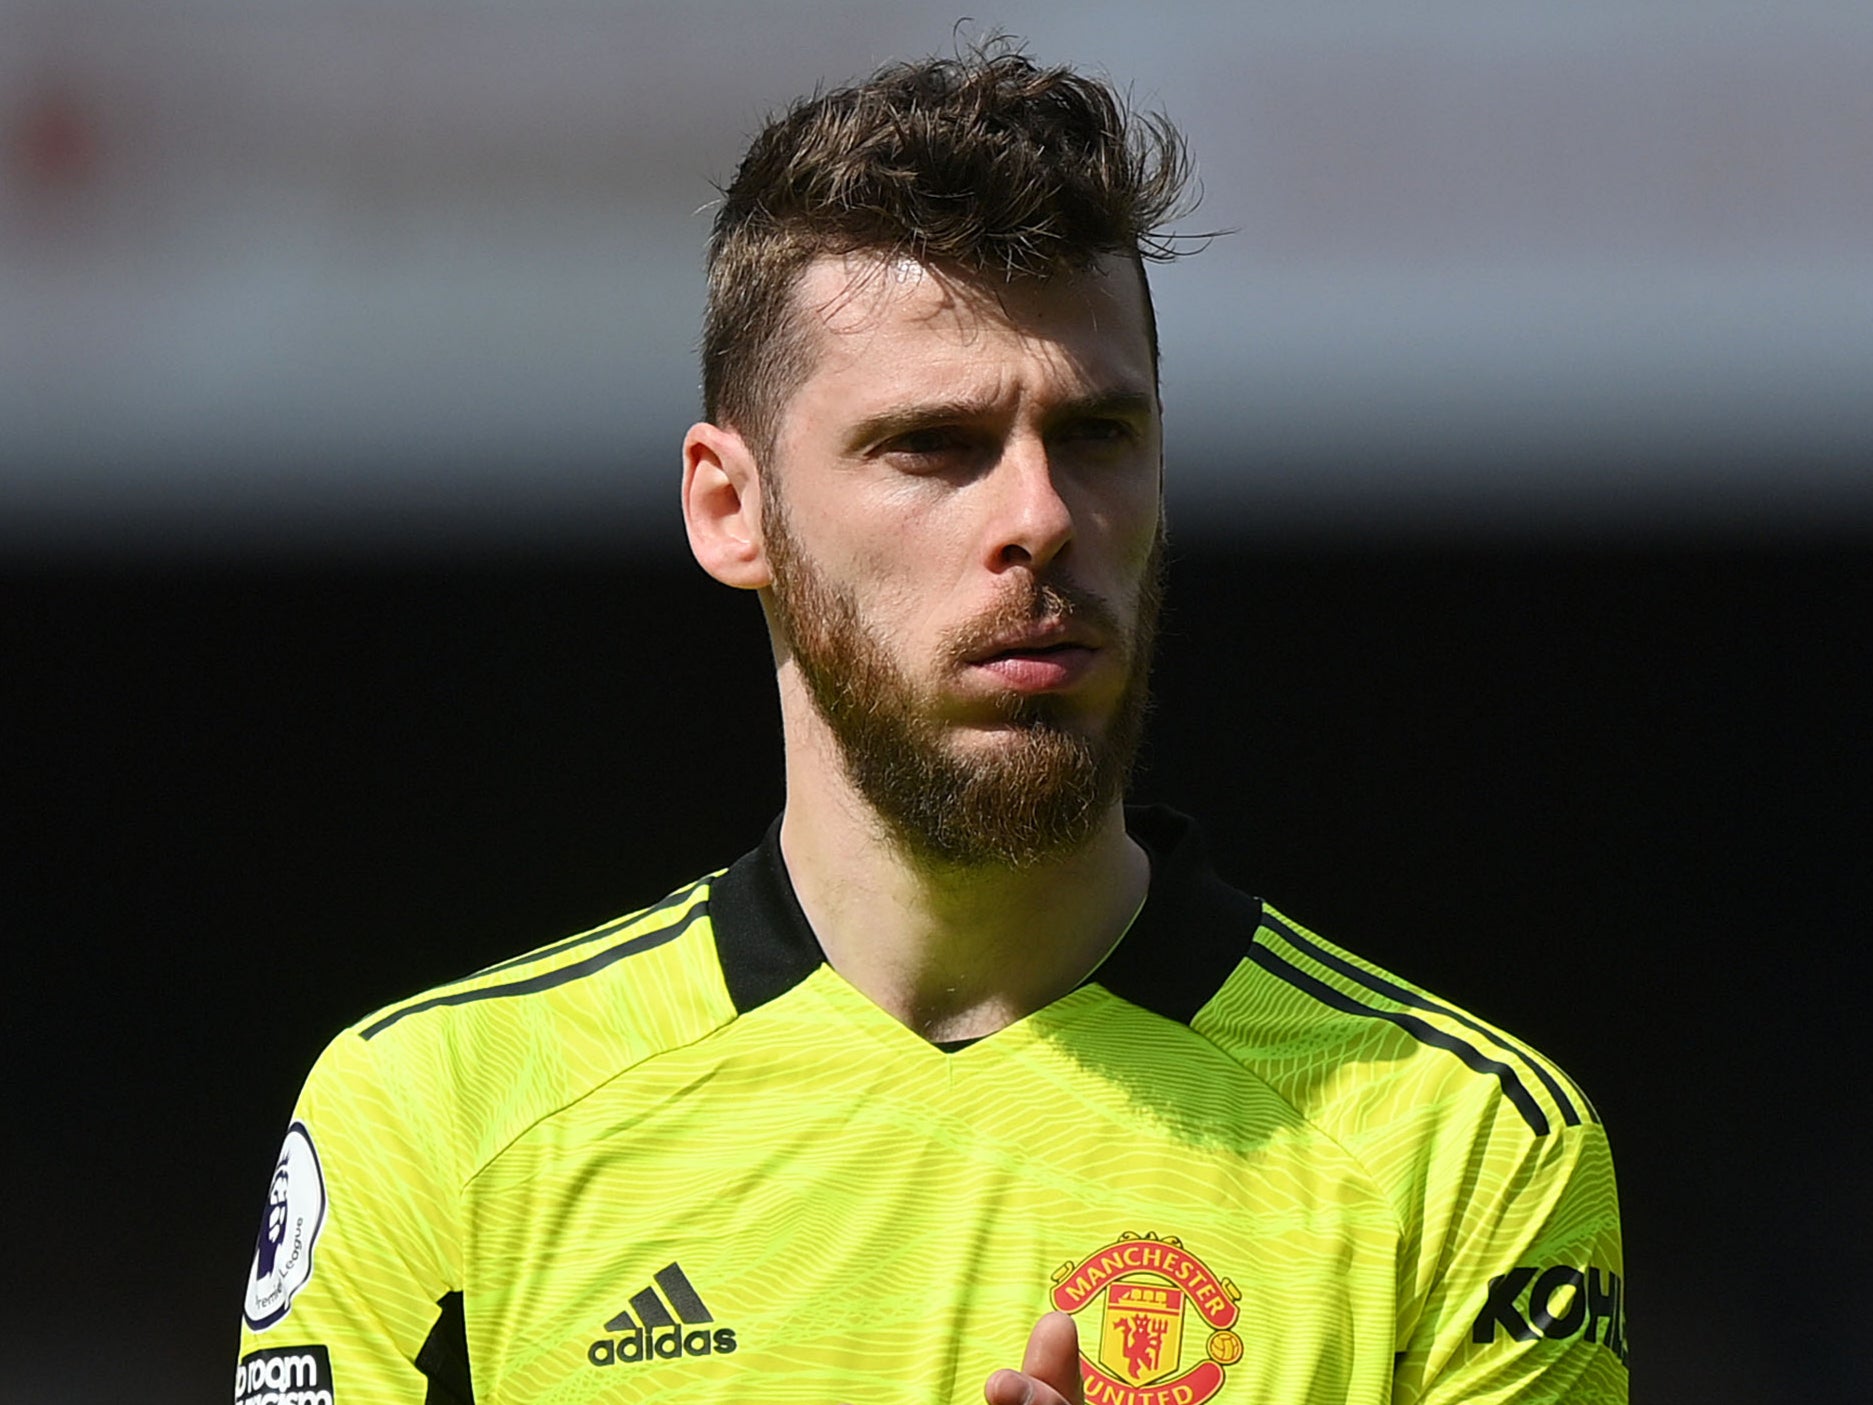 Manchester United goalkeeper David de Gea feels ‘embarassed’ with the club’s poor form